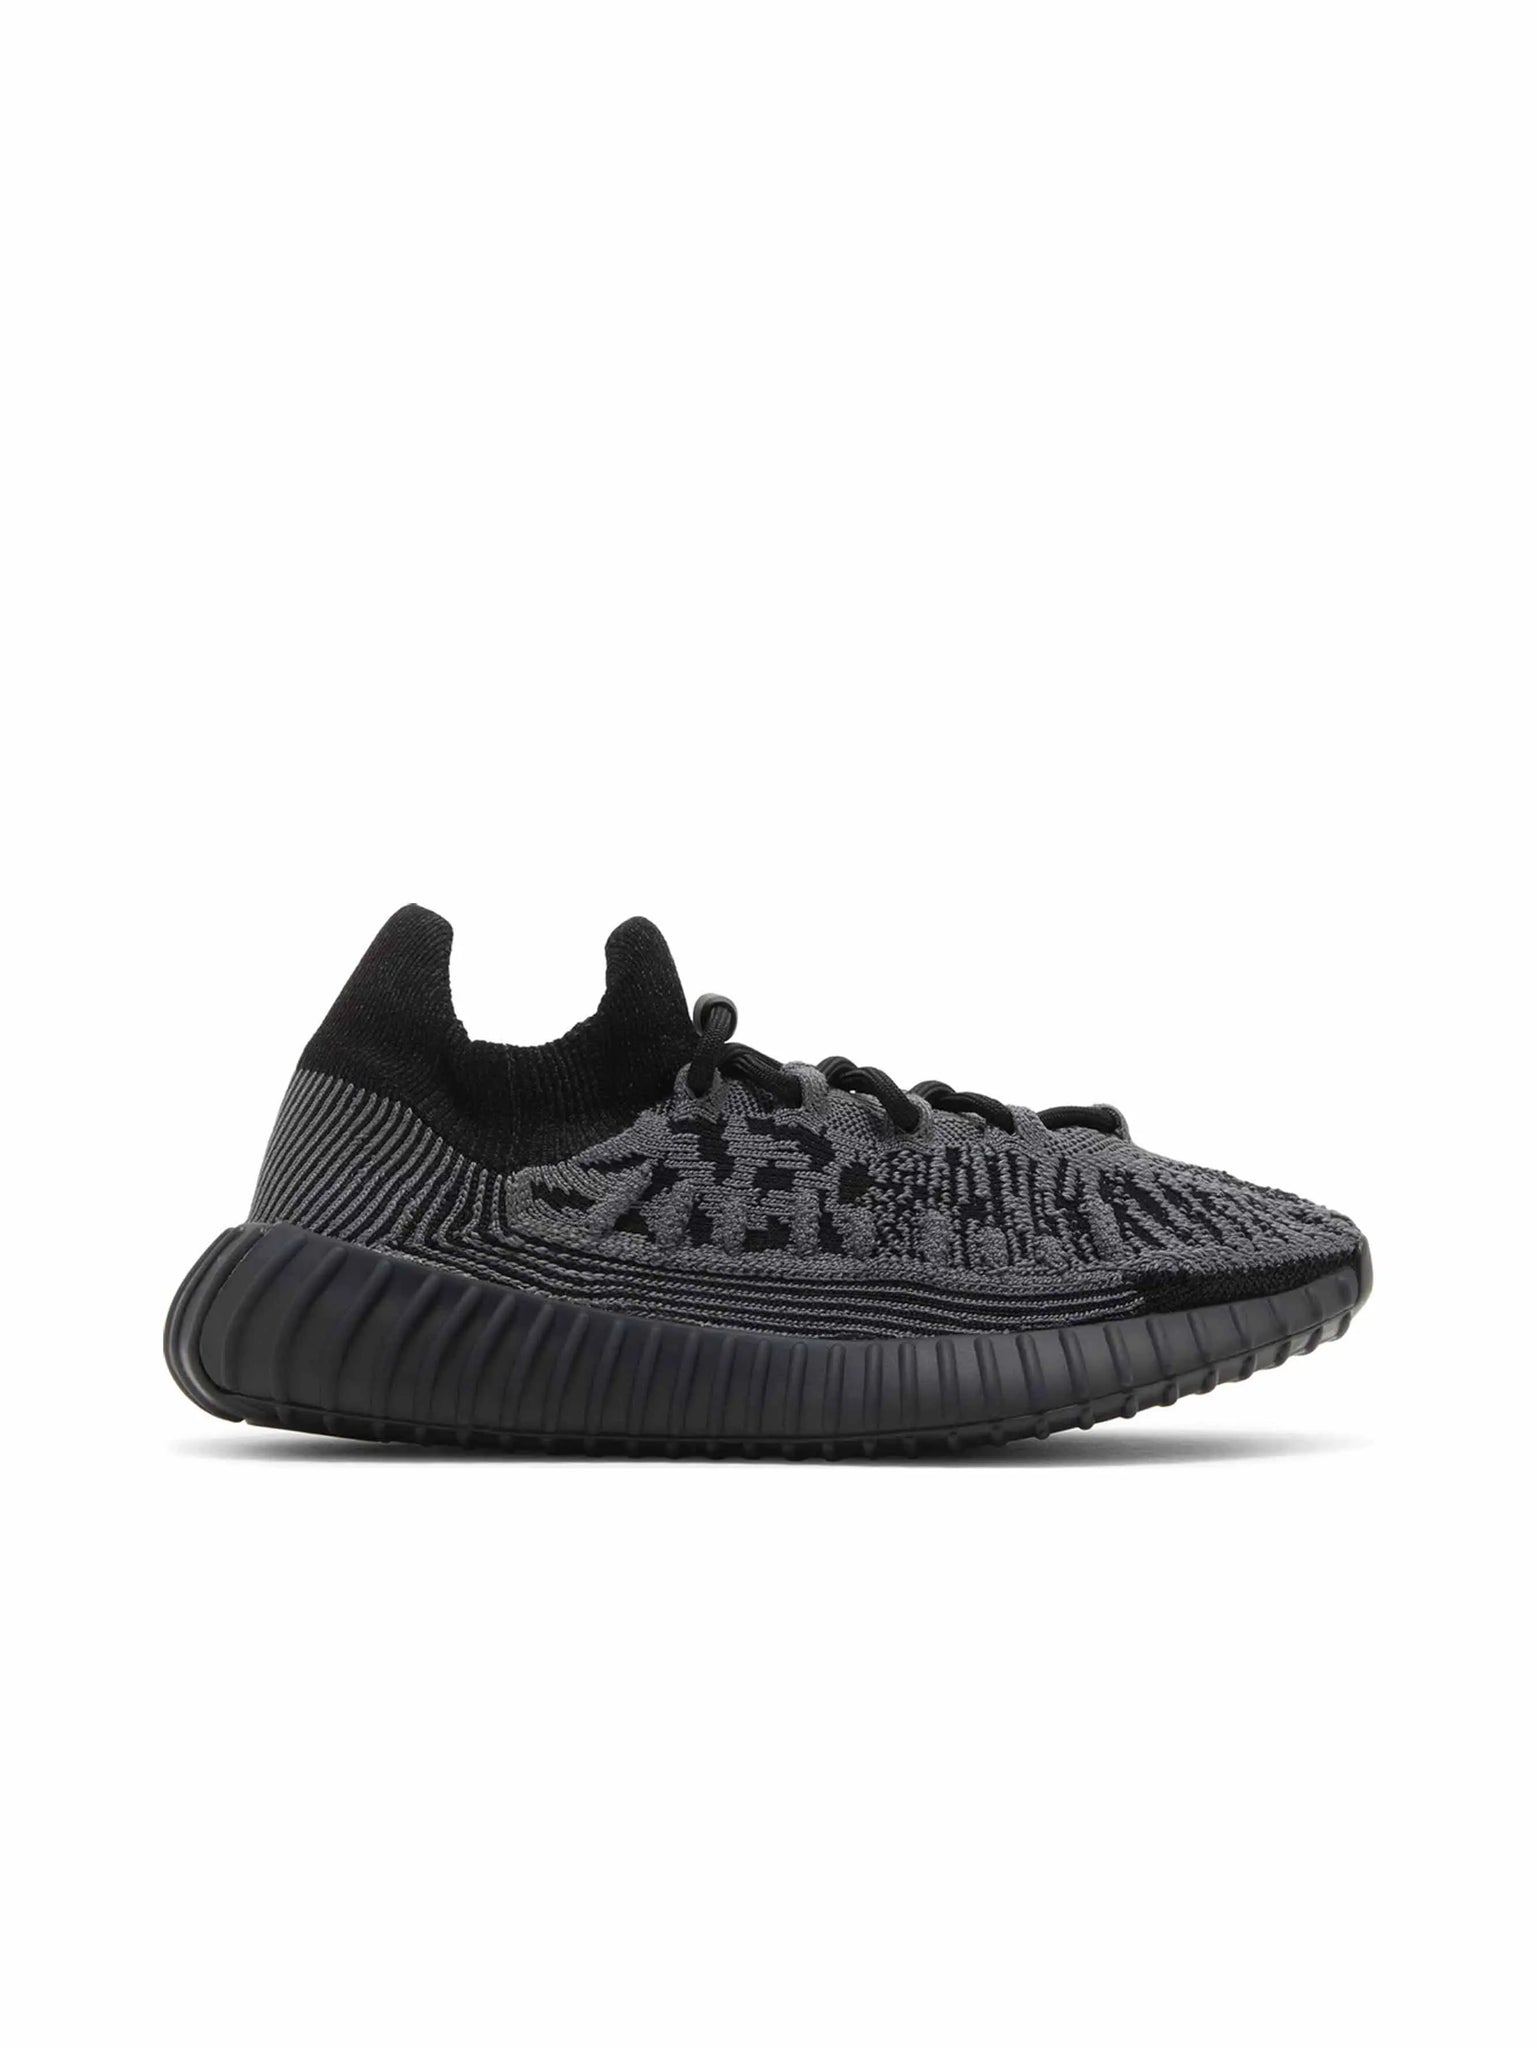 adidas Yeezy 350 V2 CMPCT Slate Onyx in Auckland, New Zealand - Shop name